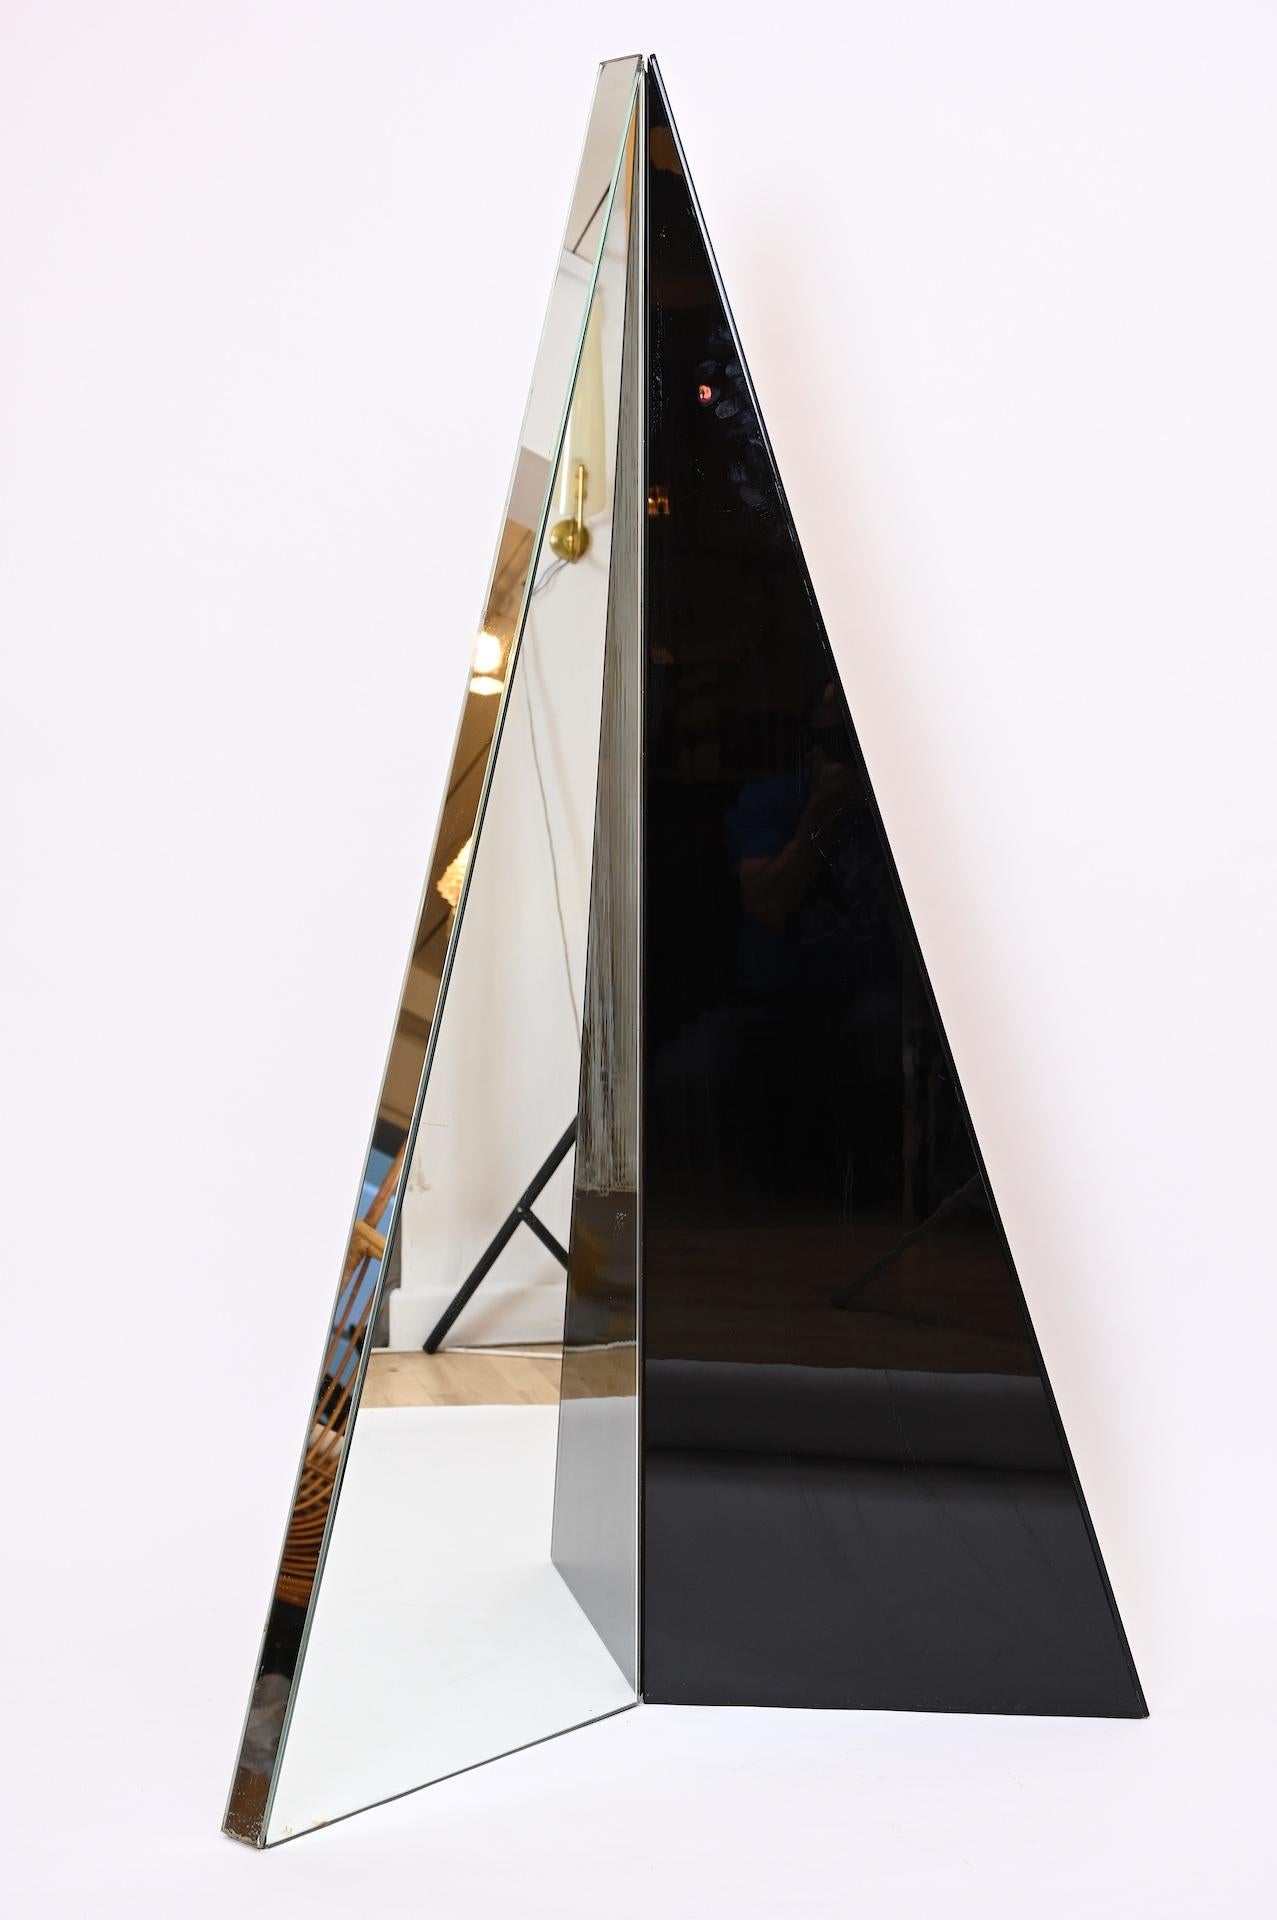 Isosceles triangle that hinges at a vertical bisection. 

One half mirrored on all sides the other black Lucite on all sides

Dimensions: 162cm x 100cm x 5.5cm 
Mirror width is 80cm when standing at right angles.
   